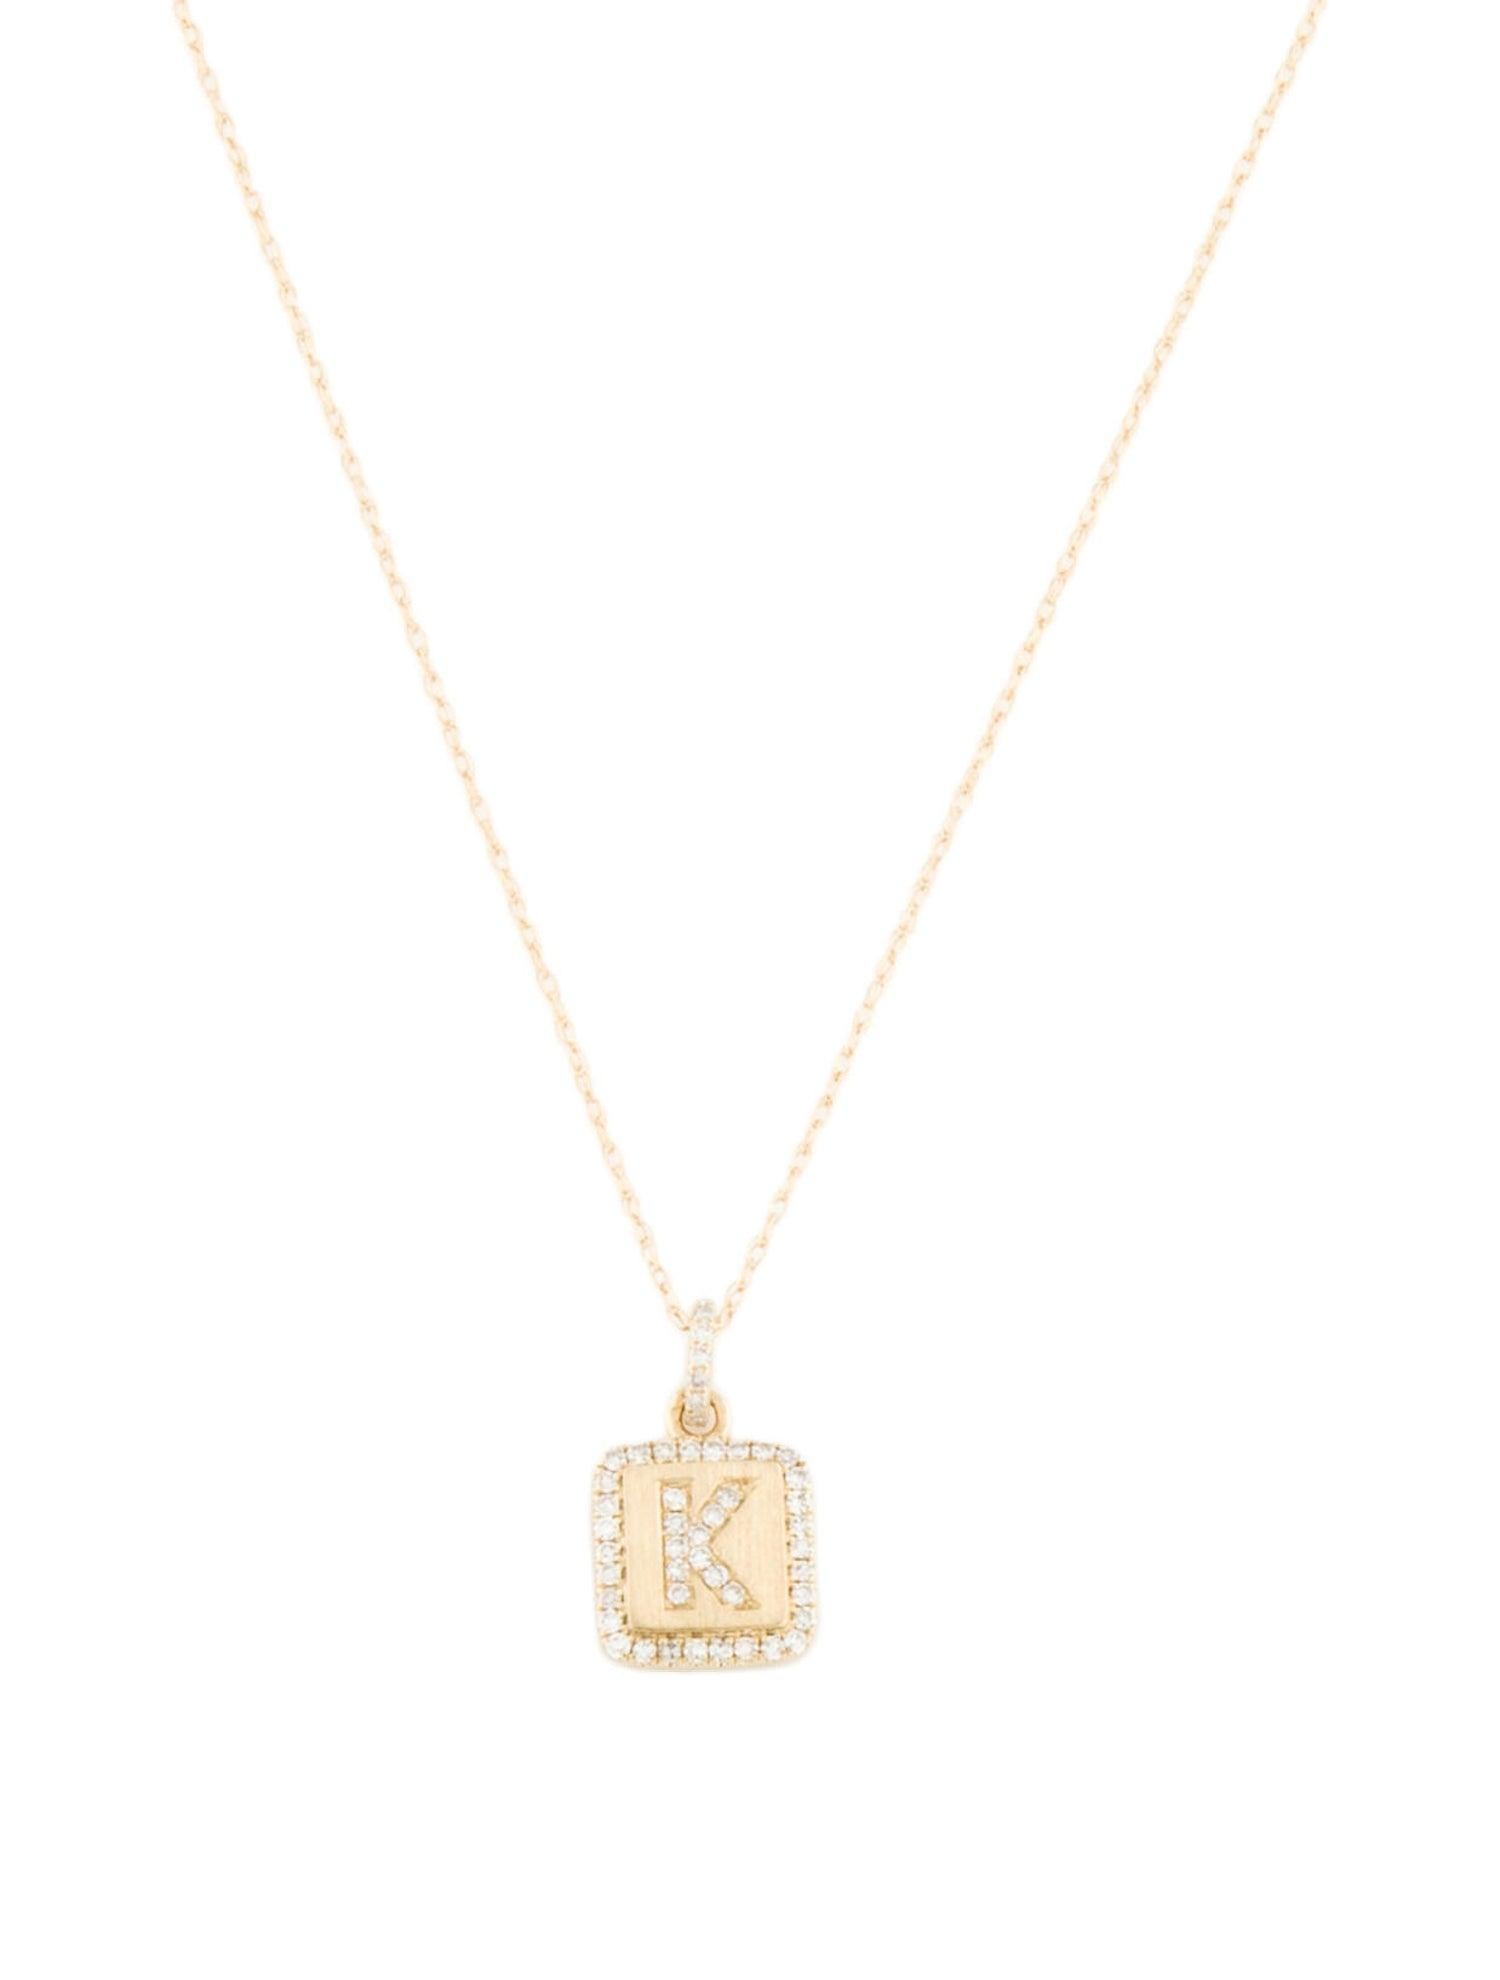 This is an adorable Dainty Initial Necklace crafted of 14k Gold with approximately 0.12 ct.- 0.15 ct. of Round Sparkly Diamonds depending on the initial. Diamond Color and Clarity GH-SI1-SI2. Comes on an 16-18